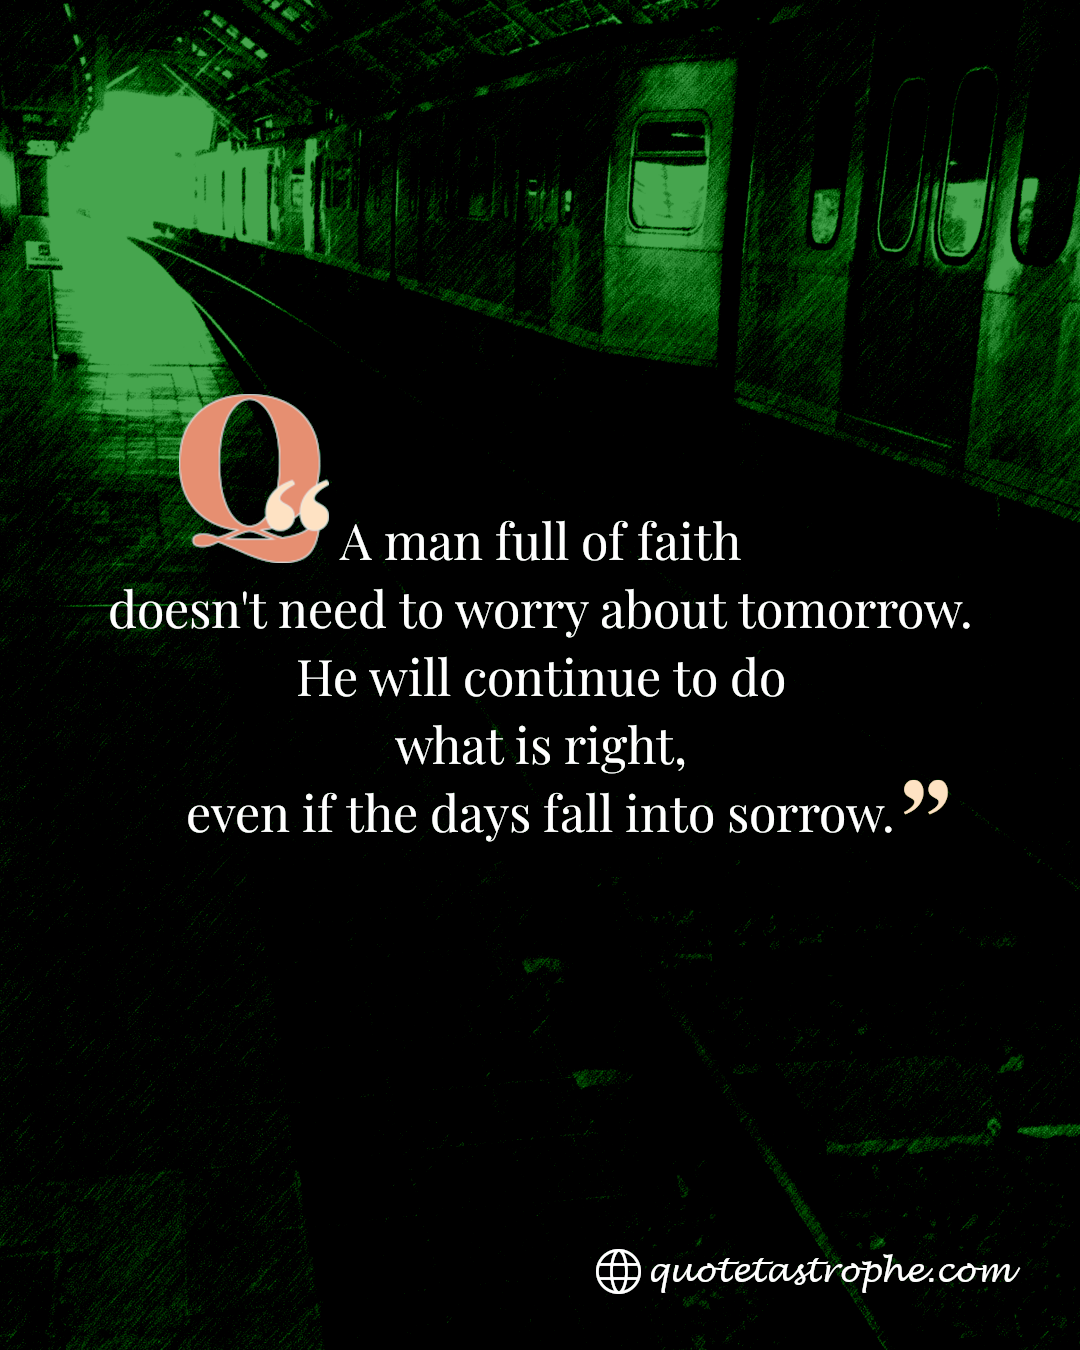 A Man Full of Faith Doesn't Need to Worry About Tomorrow